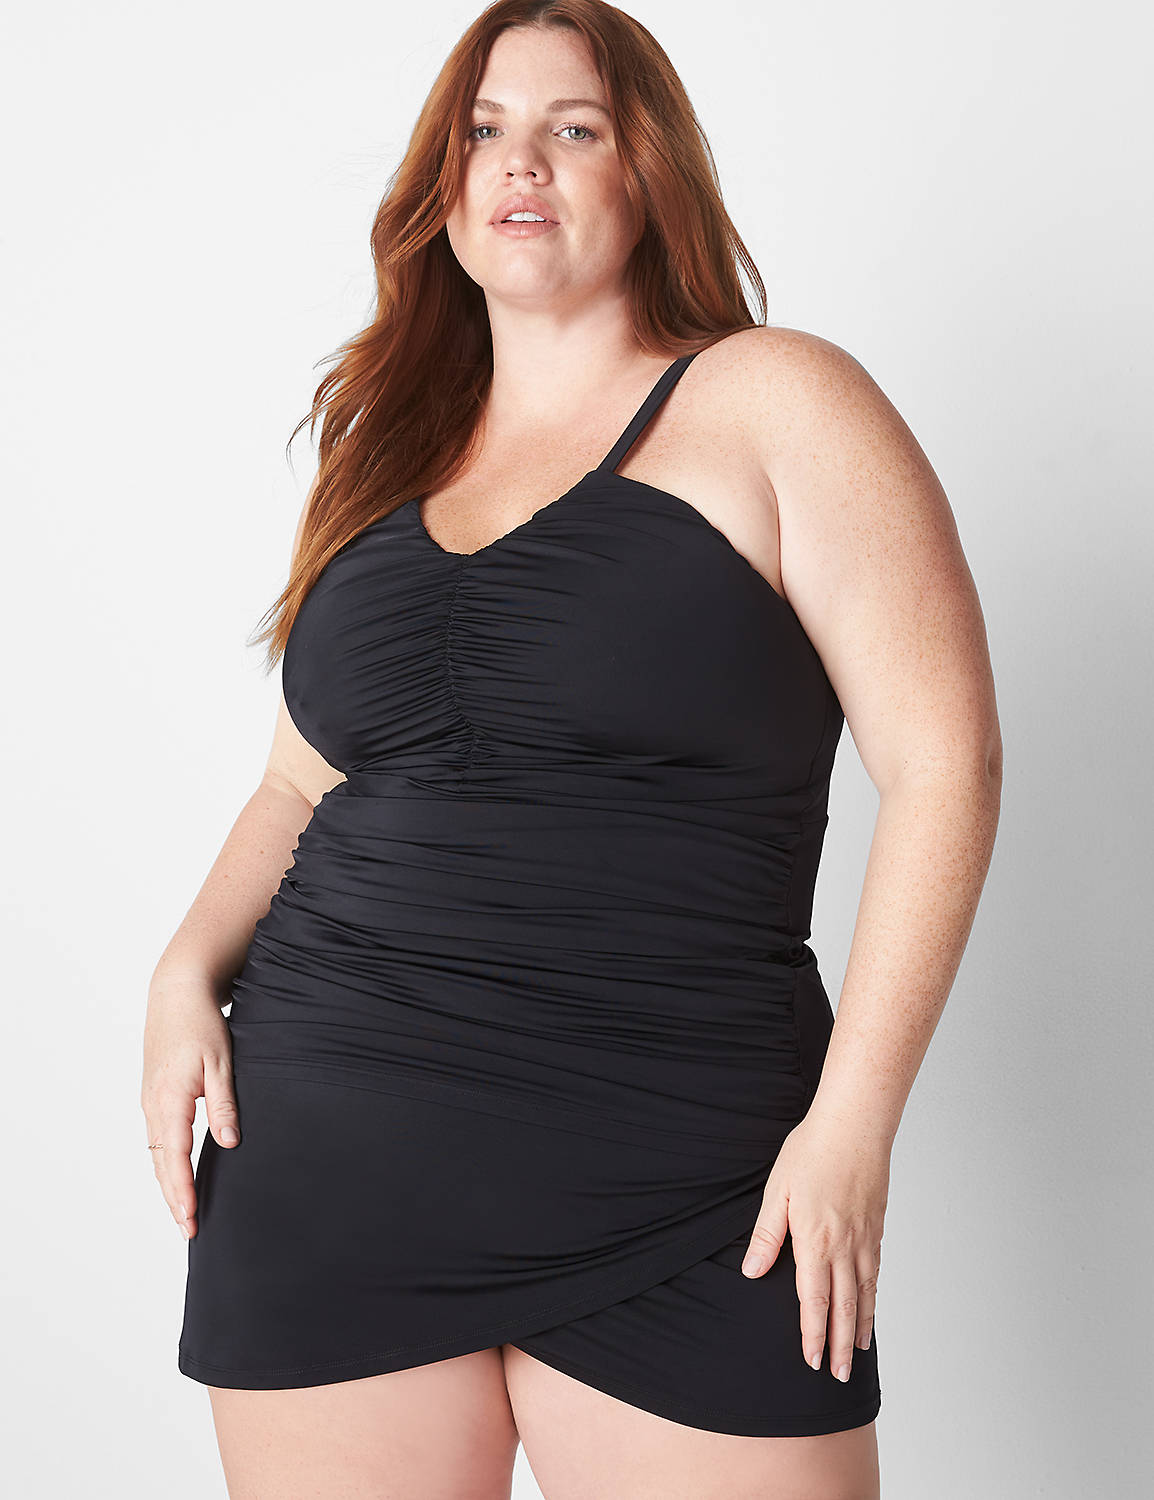 Swimsuits from LaneBryant